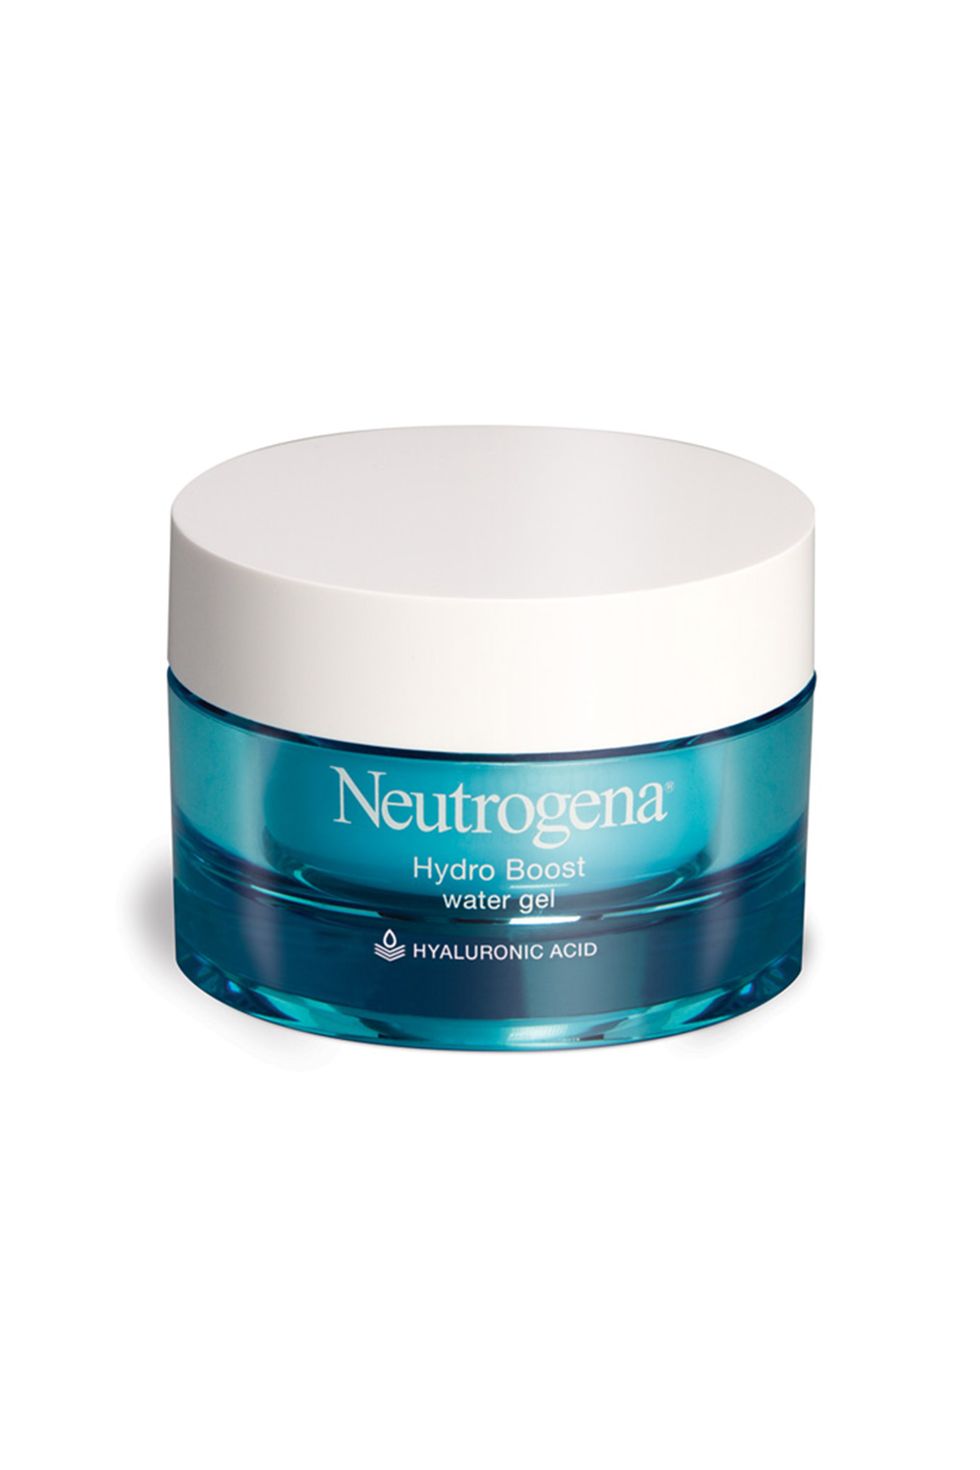 <p>There are ingredients that work over time...and there's Hyaluronic acid. Neutrogena's Water Gel is packed with the latter, which means you don't need to wait to see results. While Hydro Boost isn't technically a night cream, I smooth it on meh-looking skin before bed and wake up with a visibly springier visage.&nbsp;— Julie Schott, ELLE.com Beauty Director</p><p><em data-redactor-tag="em" data-verified="redactor">Neutrogena Hydro Boost Water Gel, $19;&nbsp;<a href="http://www.neutrogena.com/product/hydro+boost+water+gel.do?sortby=ourPicks">neutrogena.com</a></em></p>